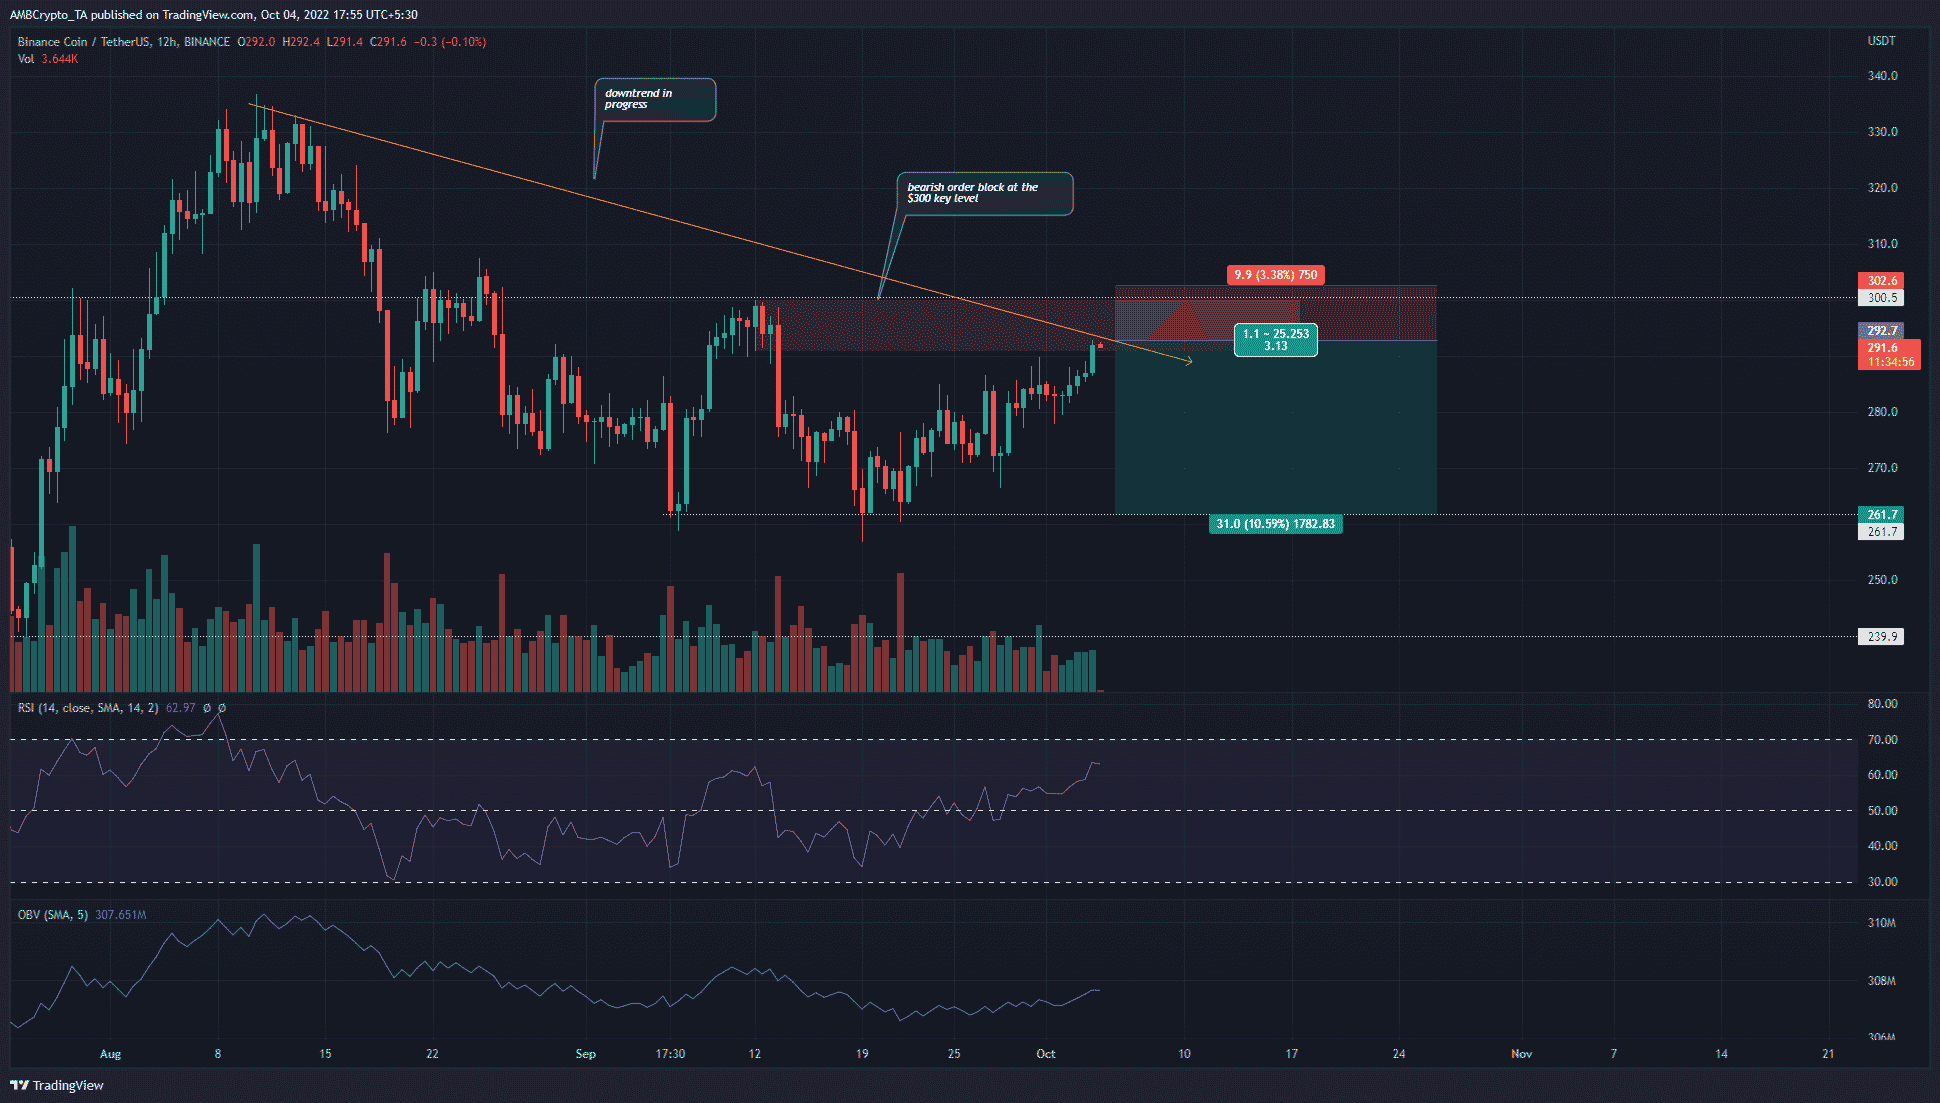 Binance Coin at a resistance zone, here is what could unfold